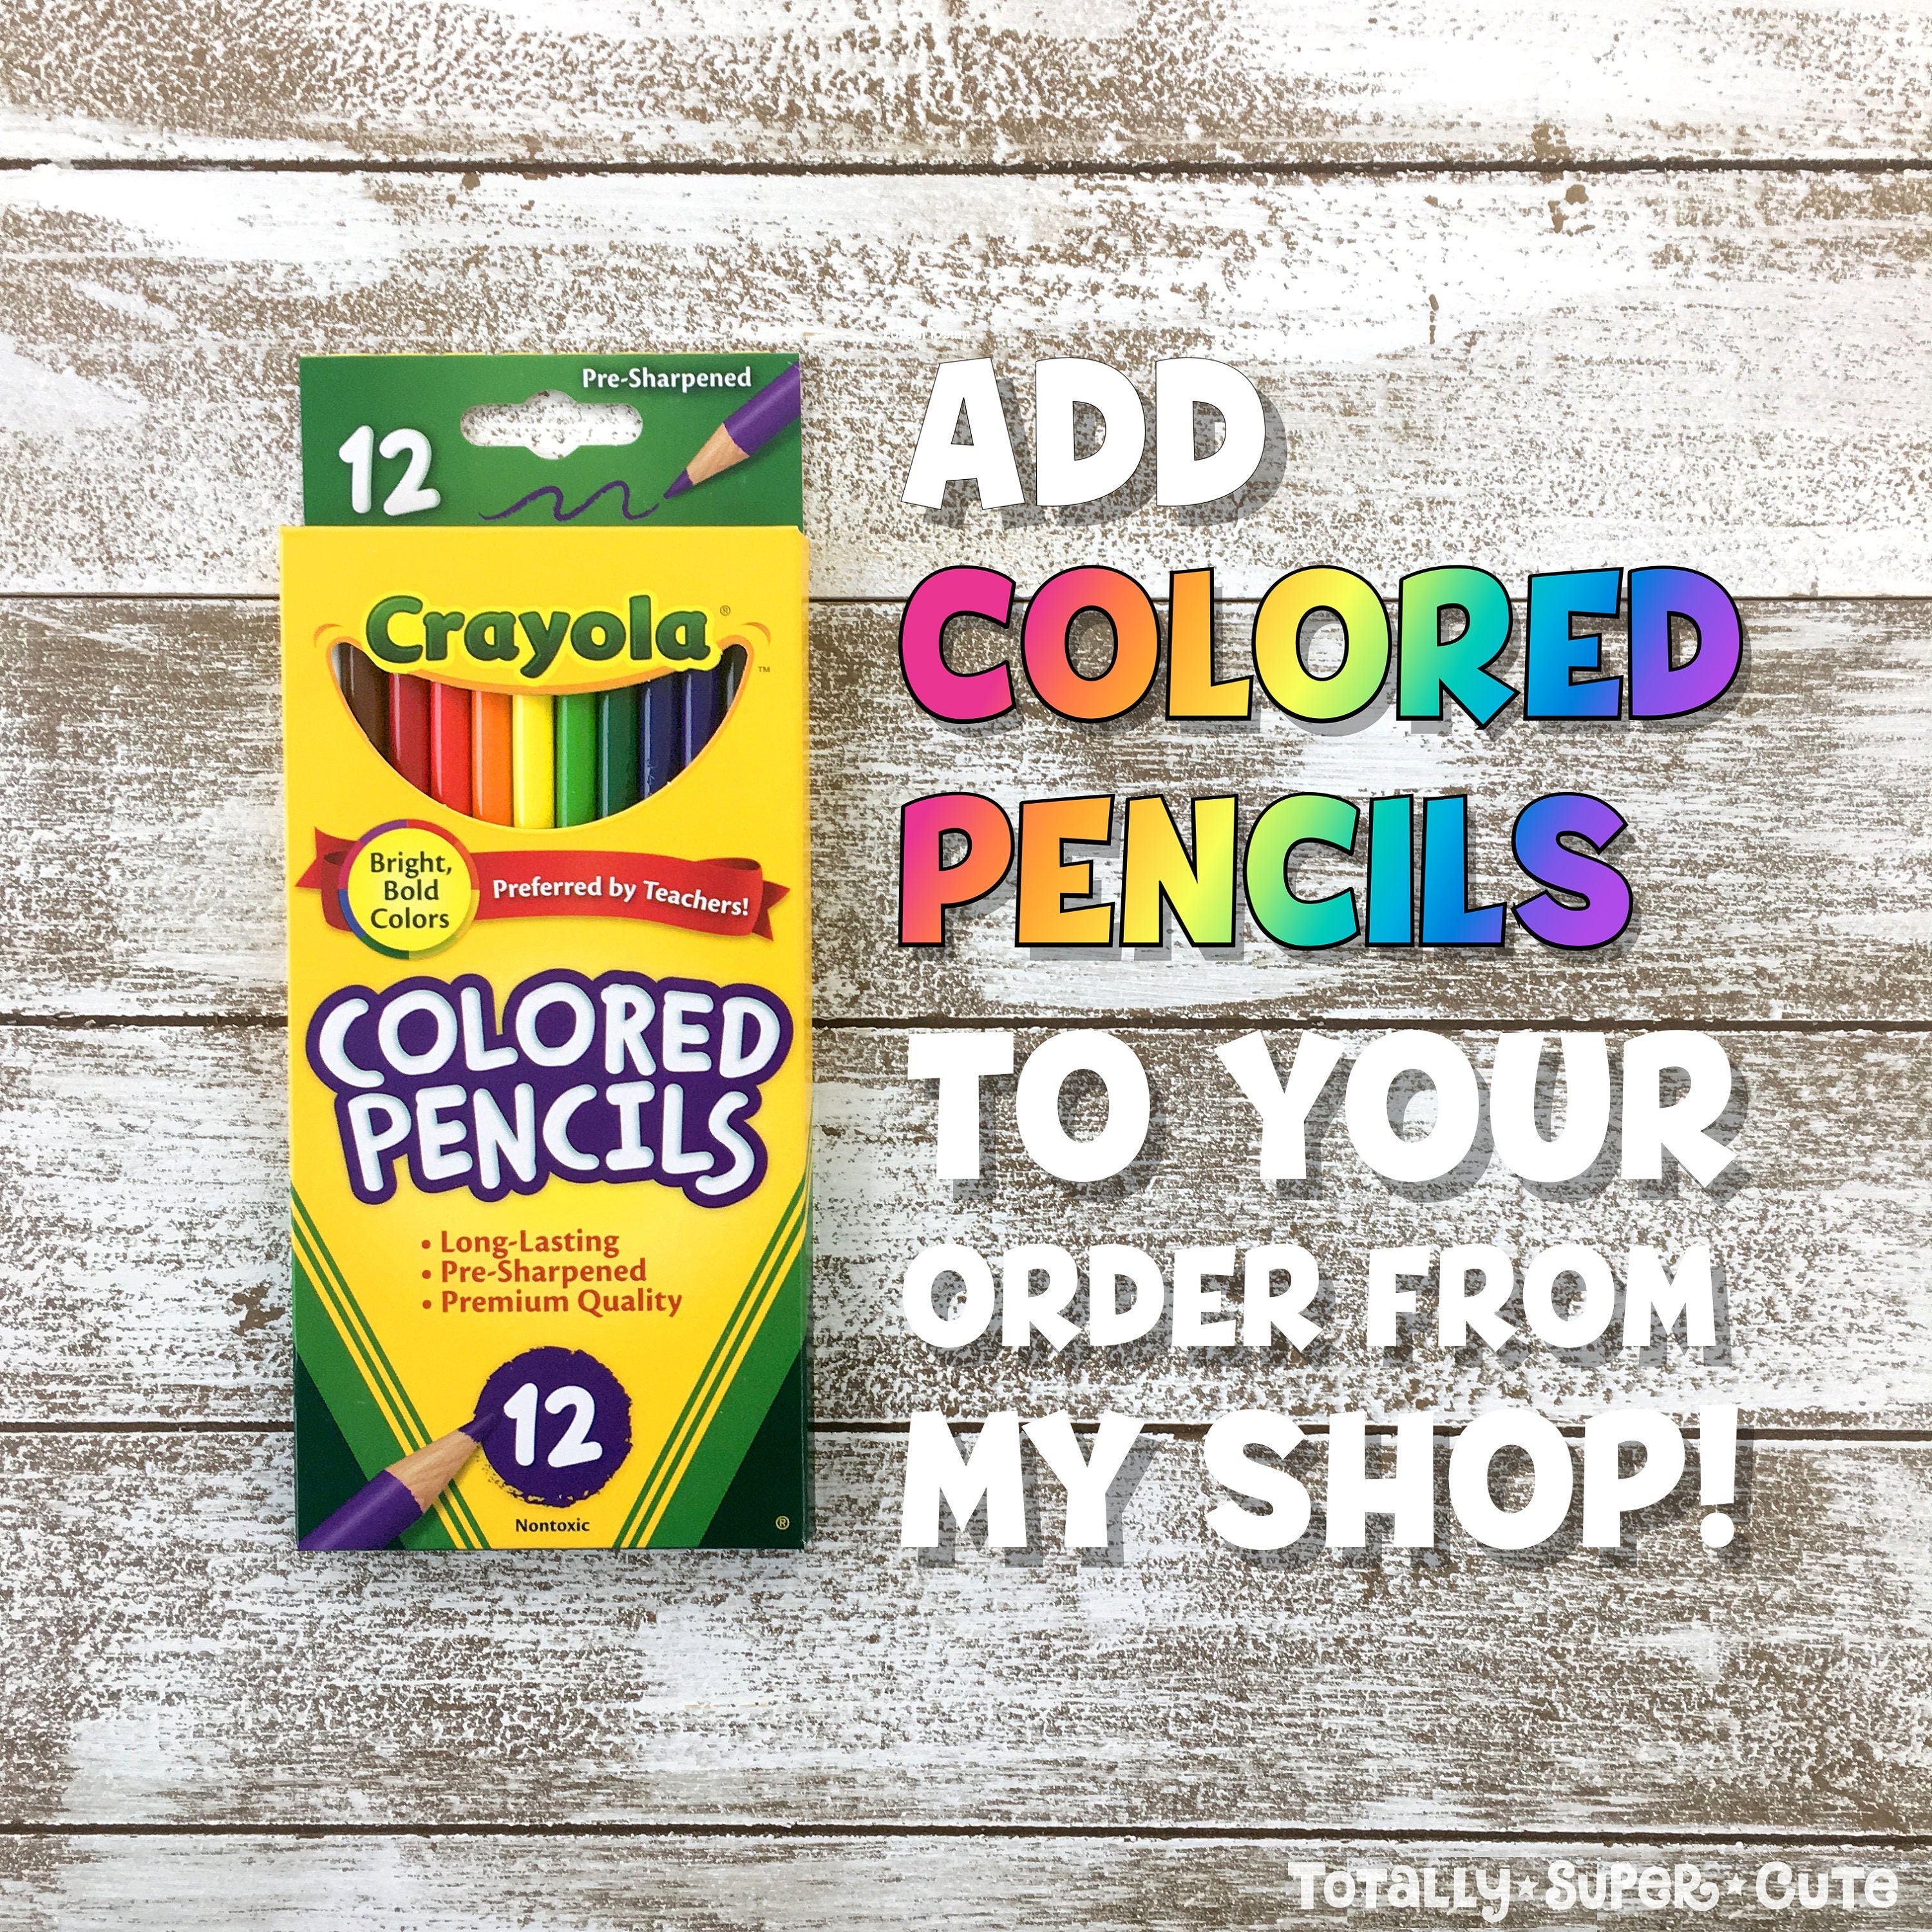 Crayola Bulk Colored Pencils, Pre-sharpened, Back to School Supplies, 12  Assorted Colors, Pack of 24, CRAYOLA COLORED PENCILS: Includes 24 packs of  12 count colored.., By Visit the Crayola Store 